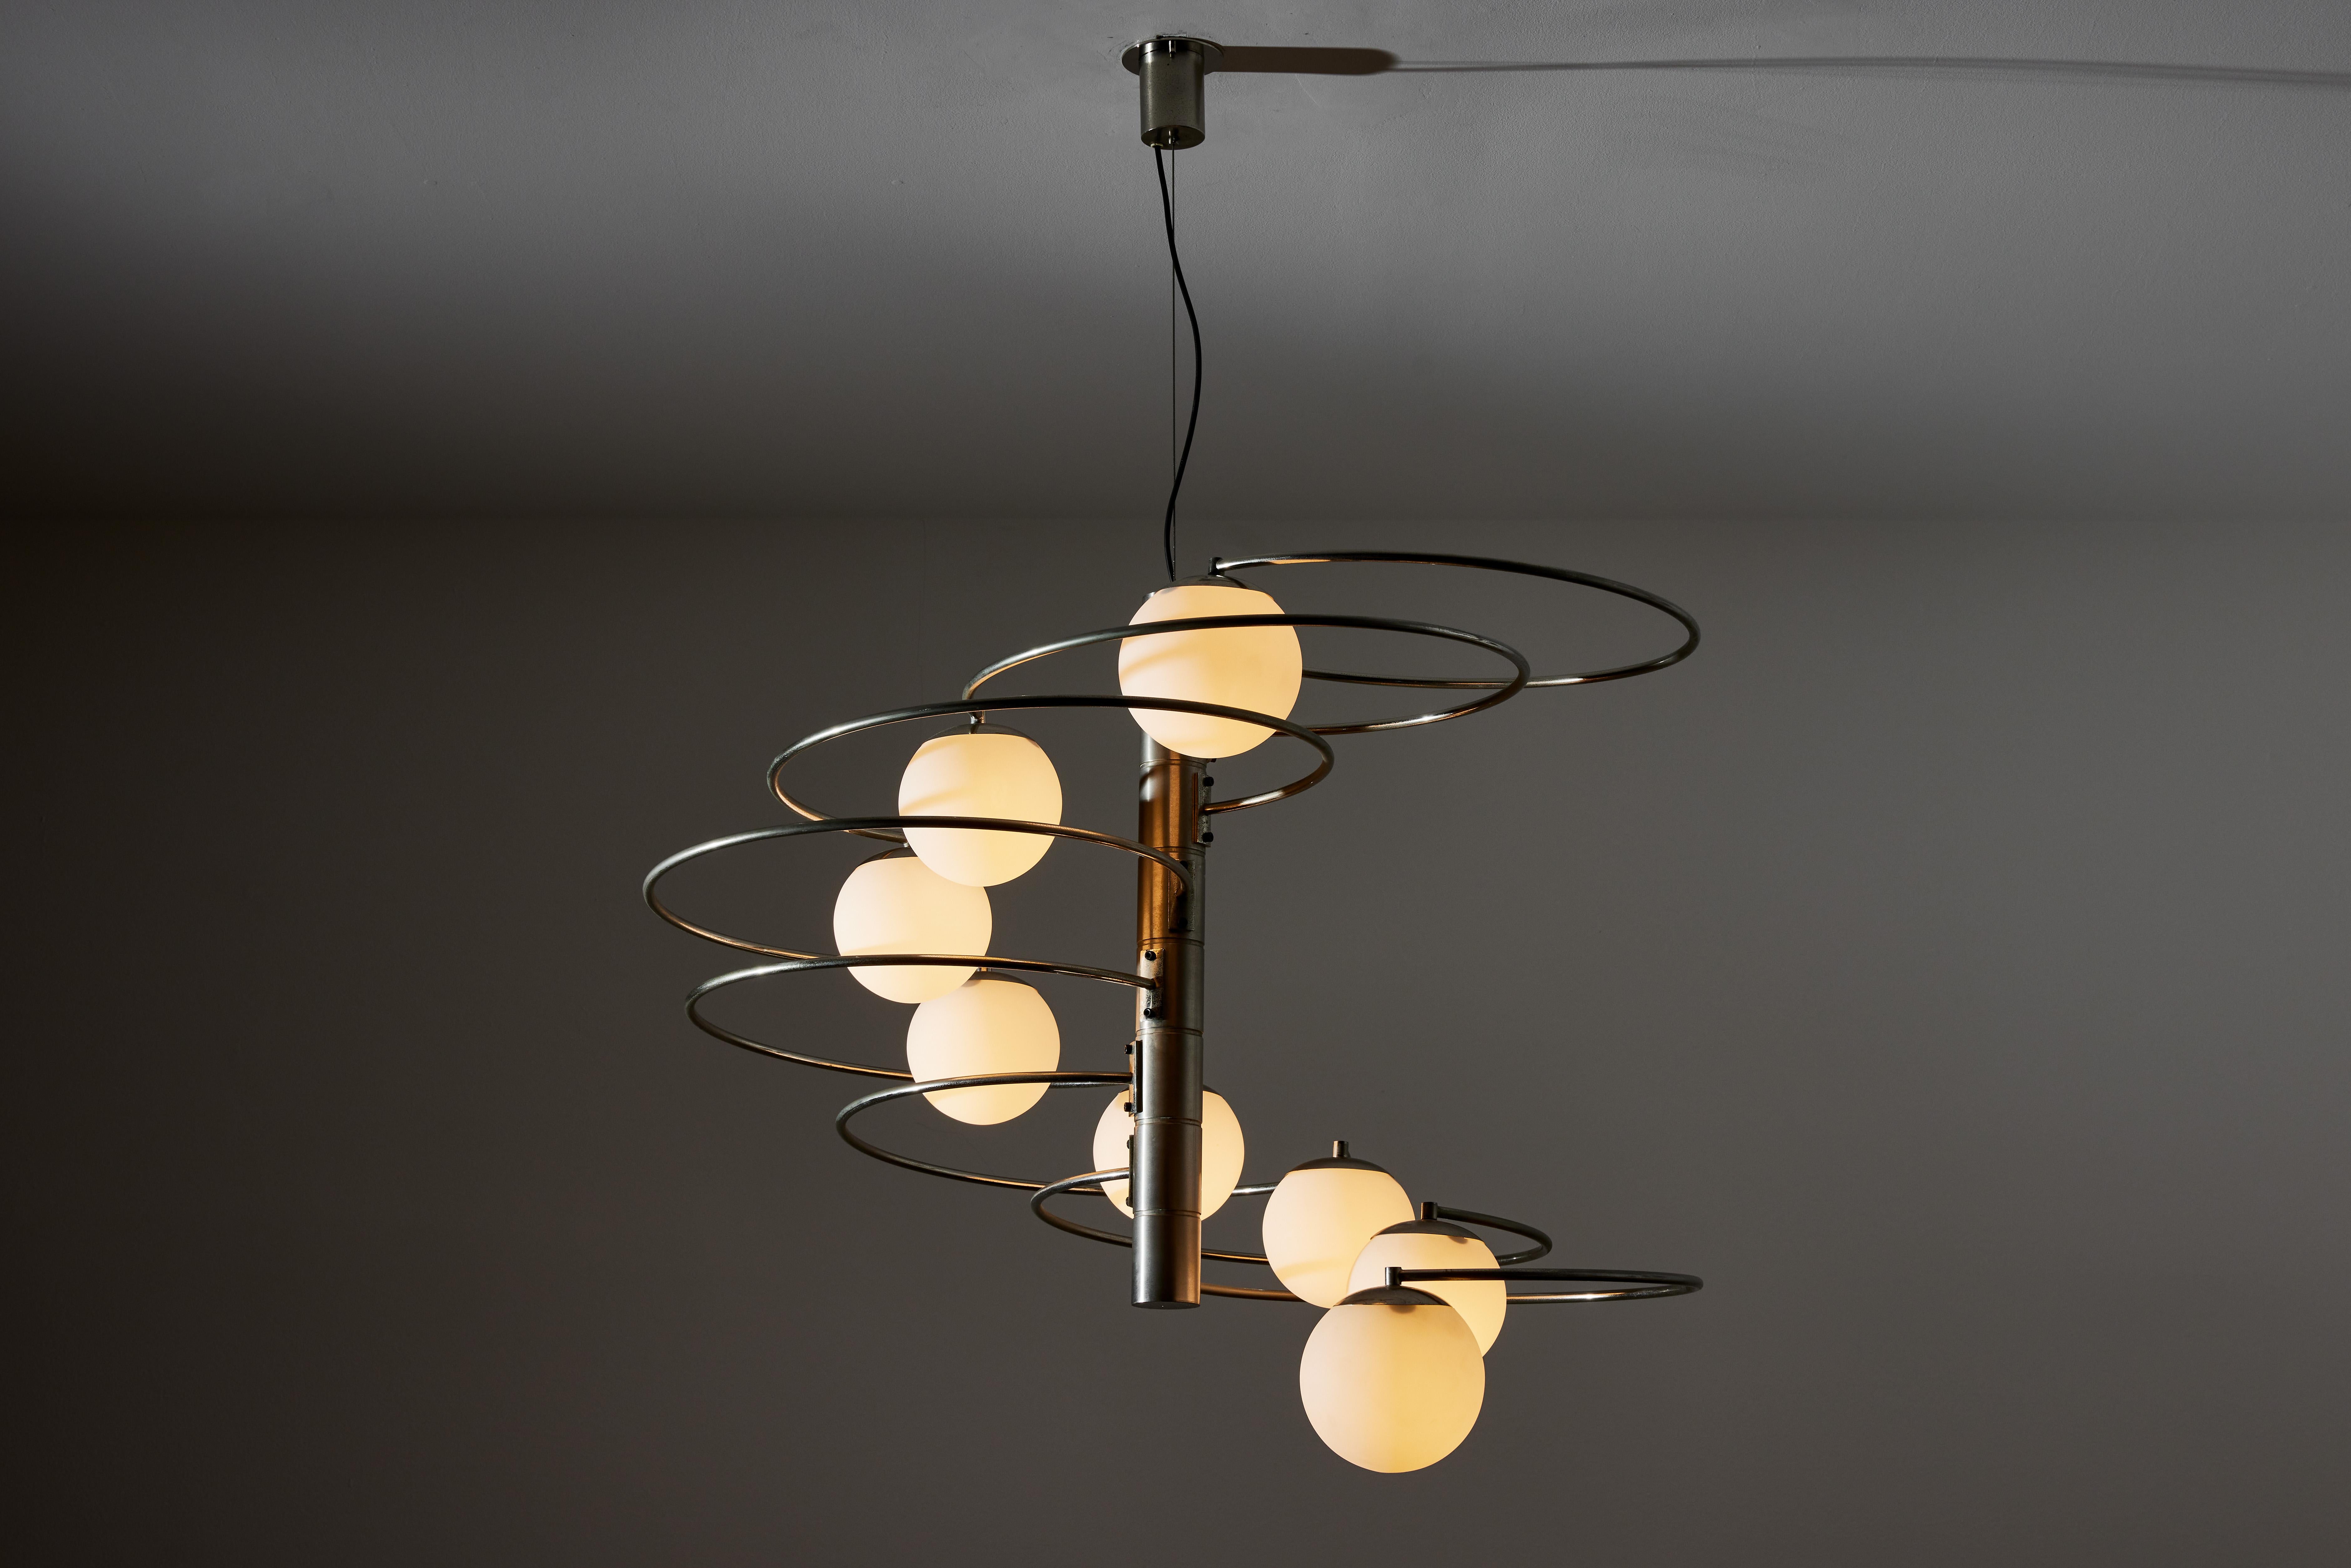 Suspension light by Pia Guidetti Crippa for Lumi. Designed and manufactured in Italy, circa 1970s. Brushed nickel, opaline glass. Custom nickel ceiling plate. Rewired for U.S. standards. We recommend eight E14 40w maximum bulbs. Bulbs provided as a